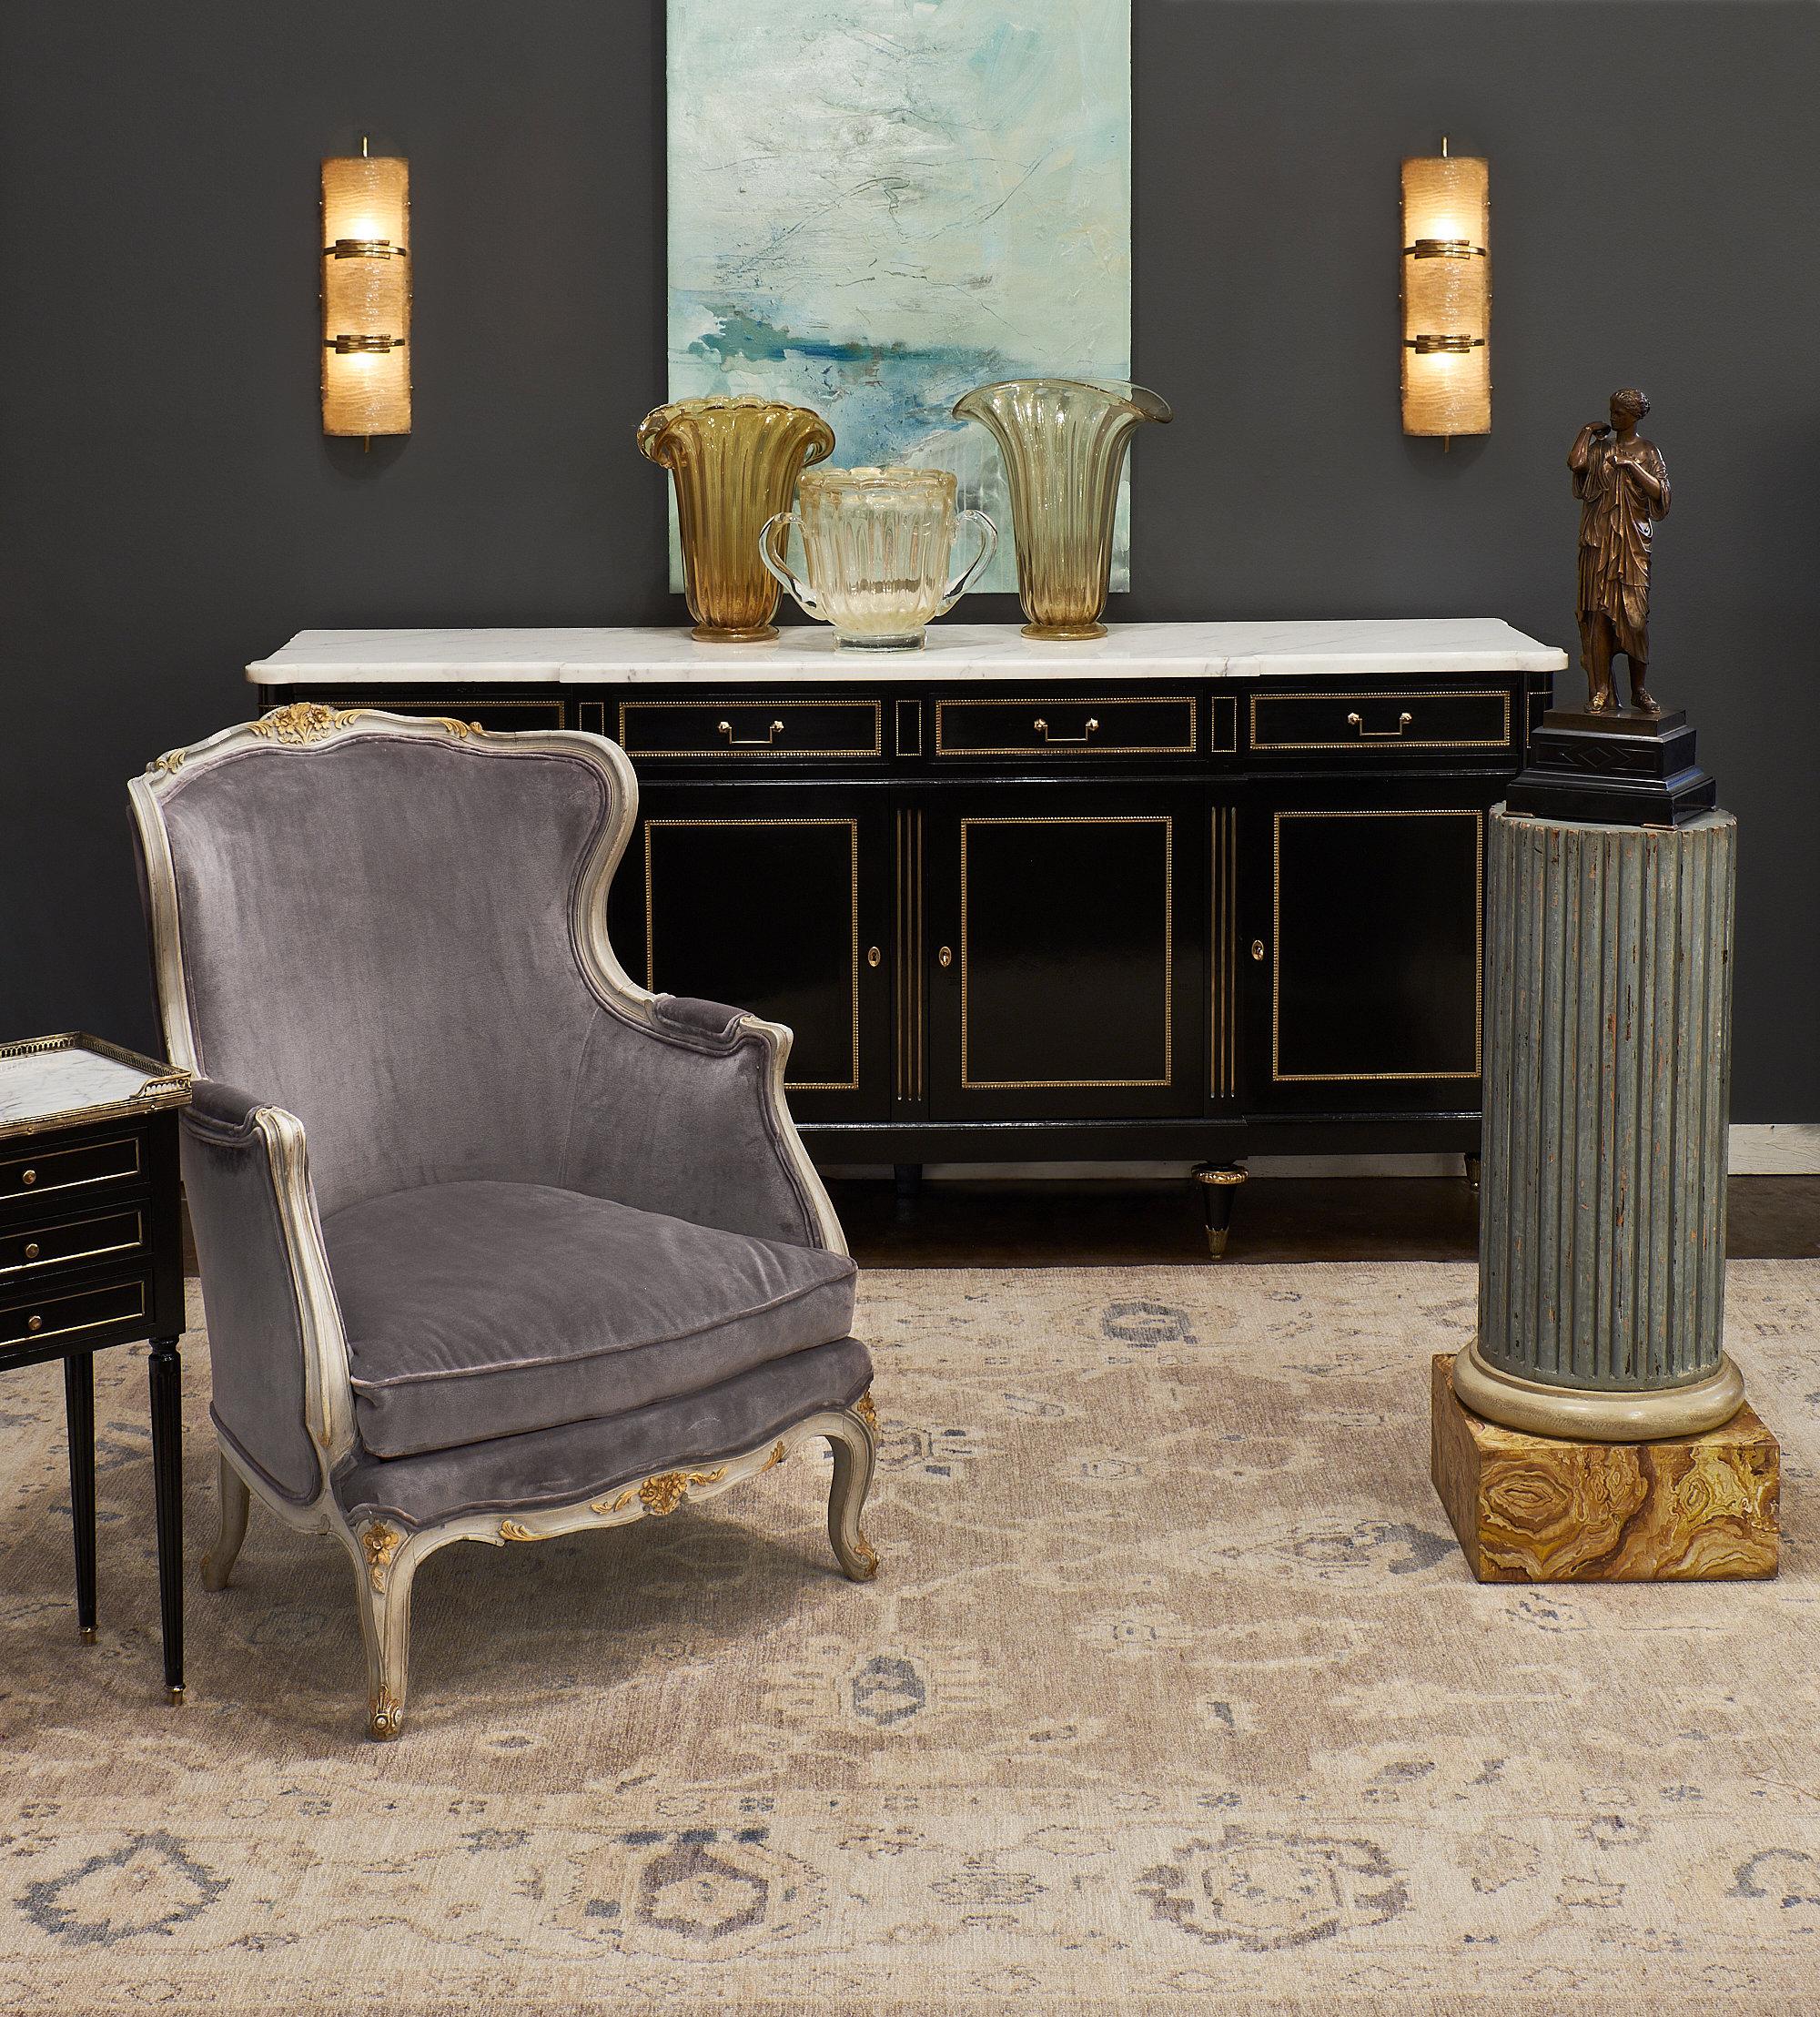 A fine French marble topped Louis XVI style pair of side tables; each featuring three dovetailed drawers trimmed with gilt brass. The tables are made of ebonized mahogany; finished with a lustrous French polish. The Carrara marble tops are protected